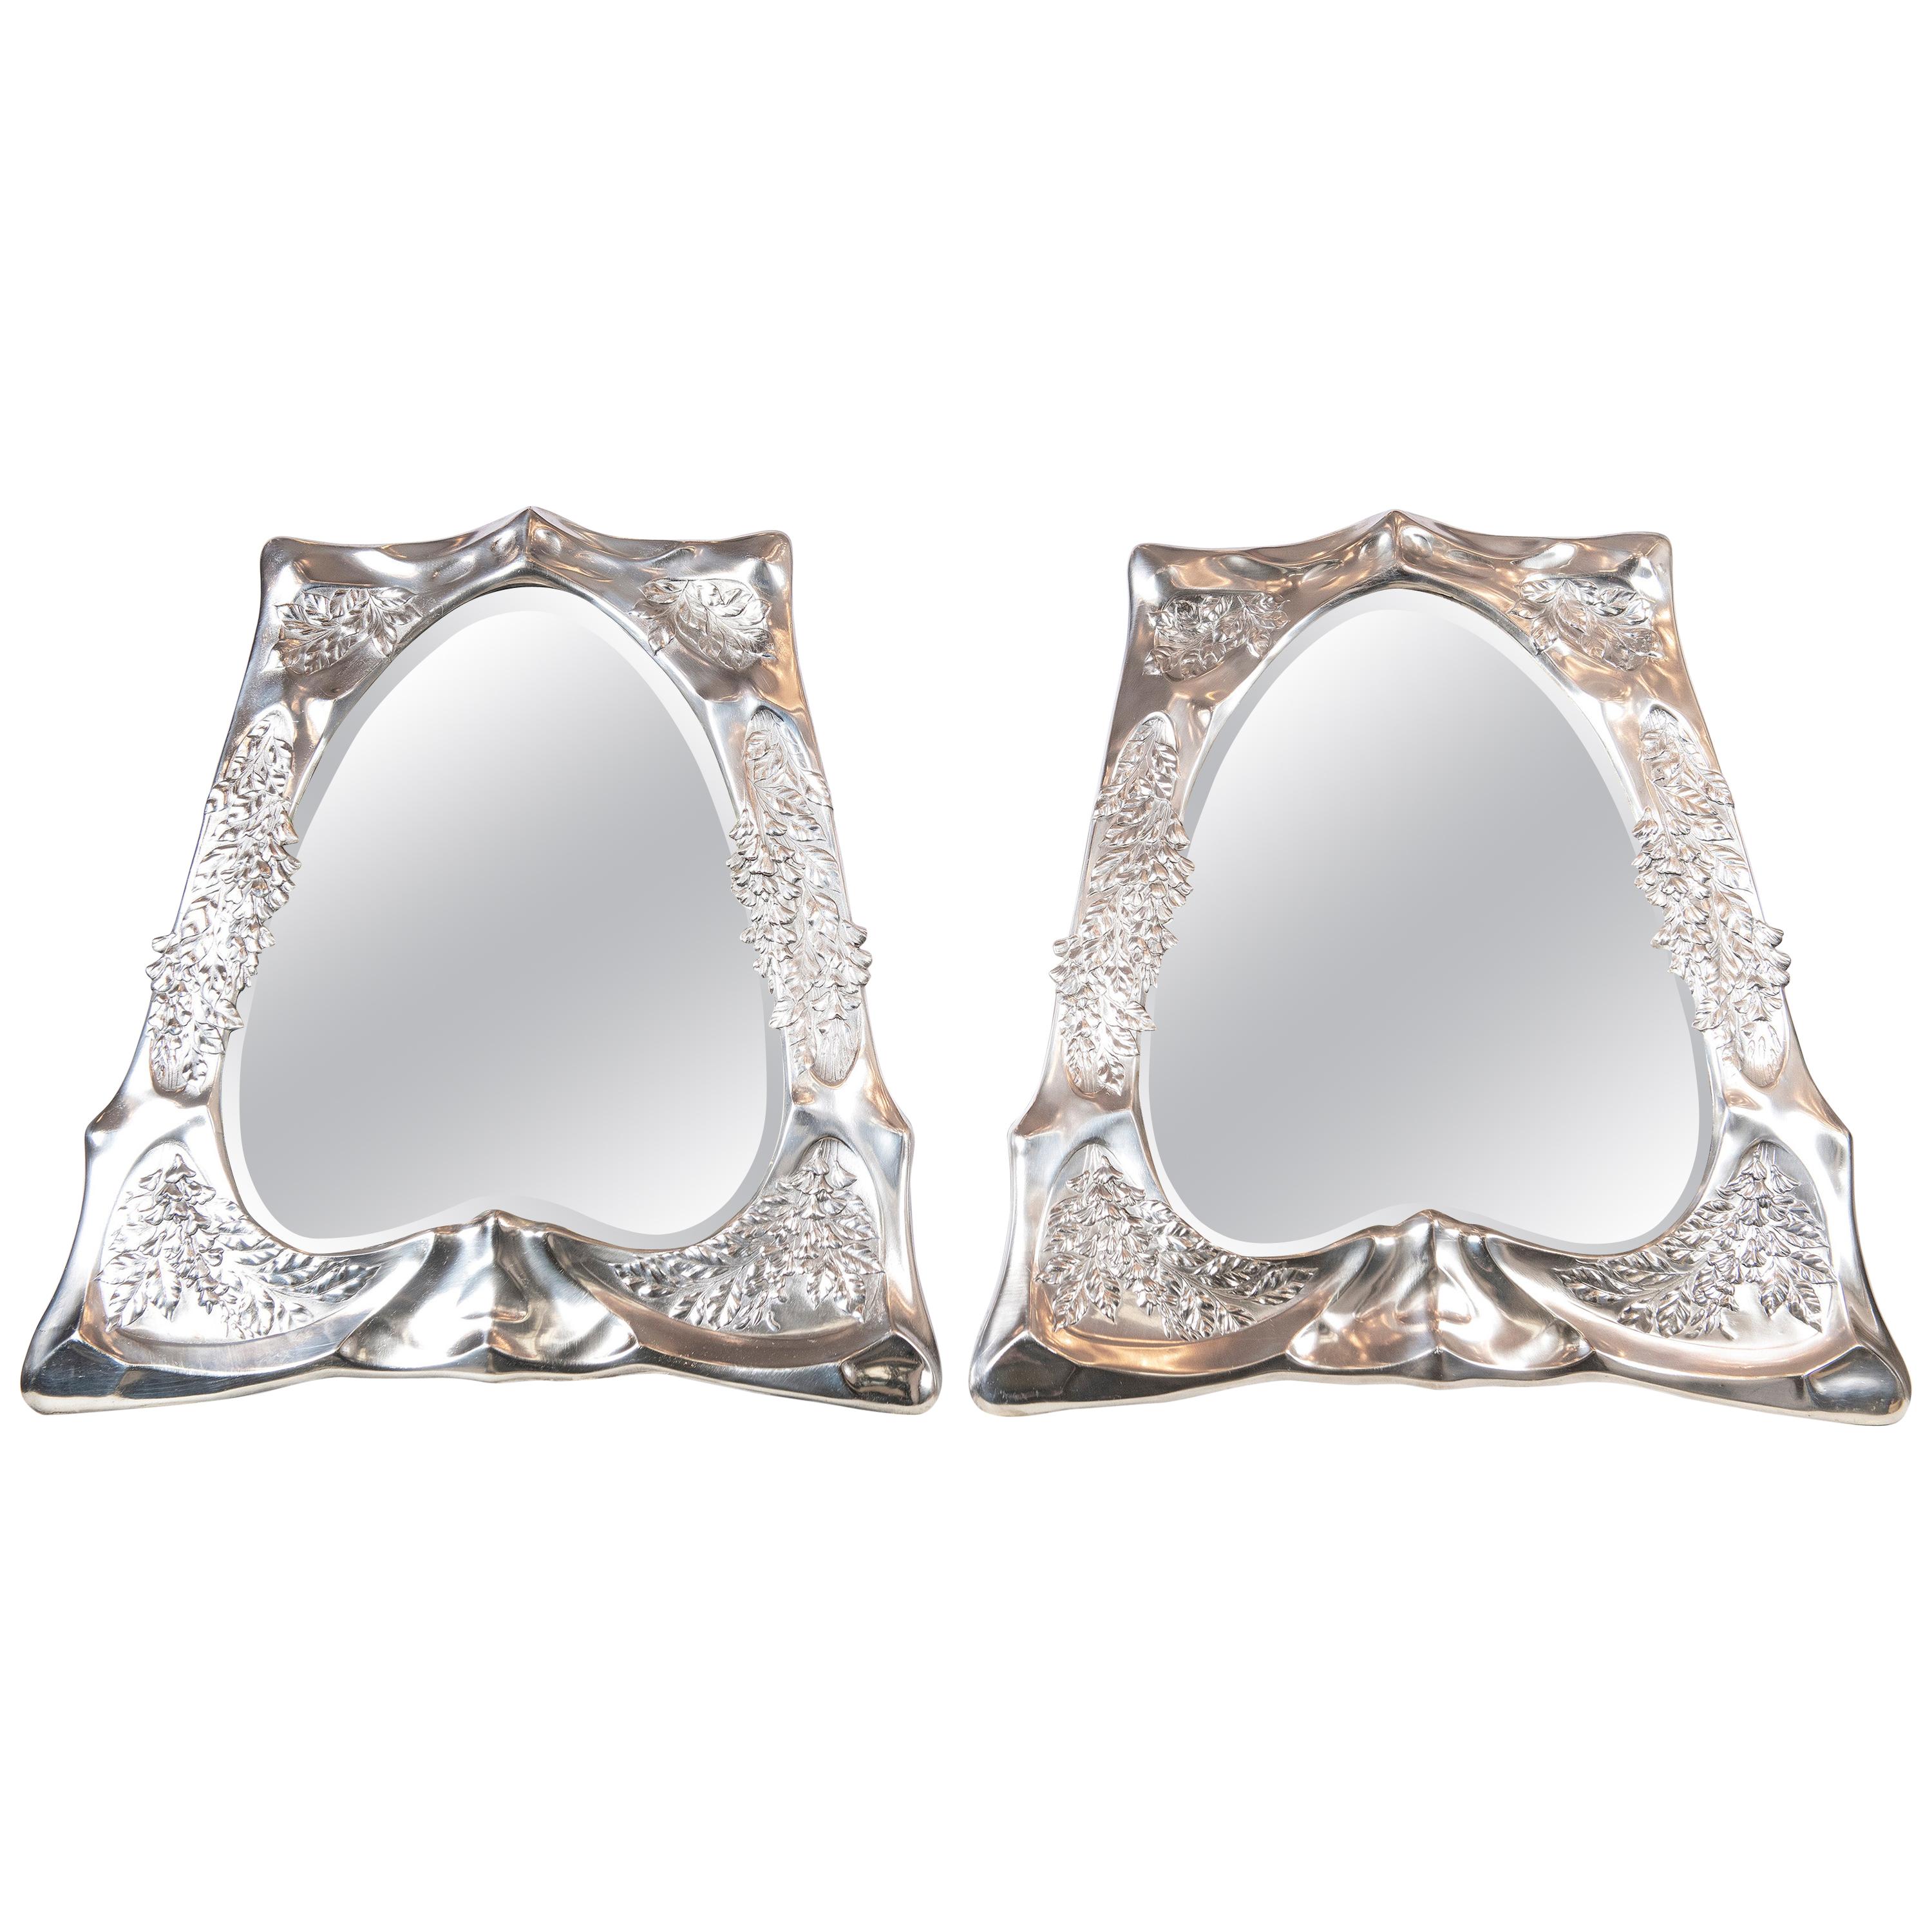 Pair of W.M.F. Silver Plate Mirrors, Jugendnstil Period, Germany, circa 1900 For Sale